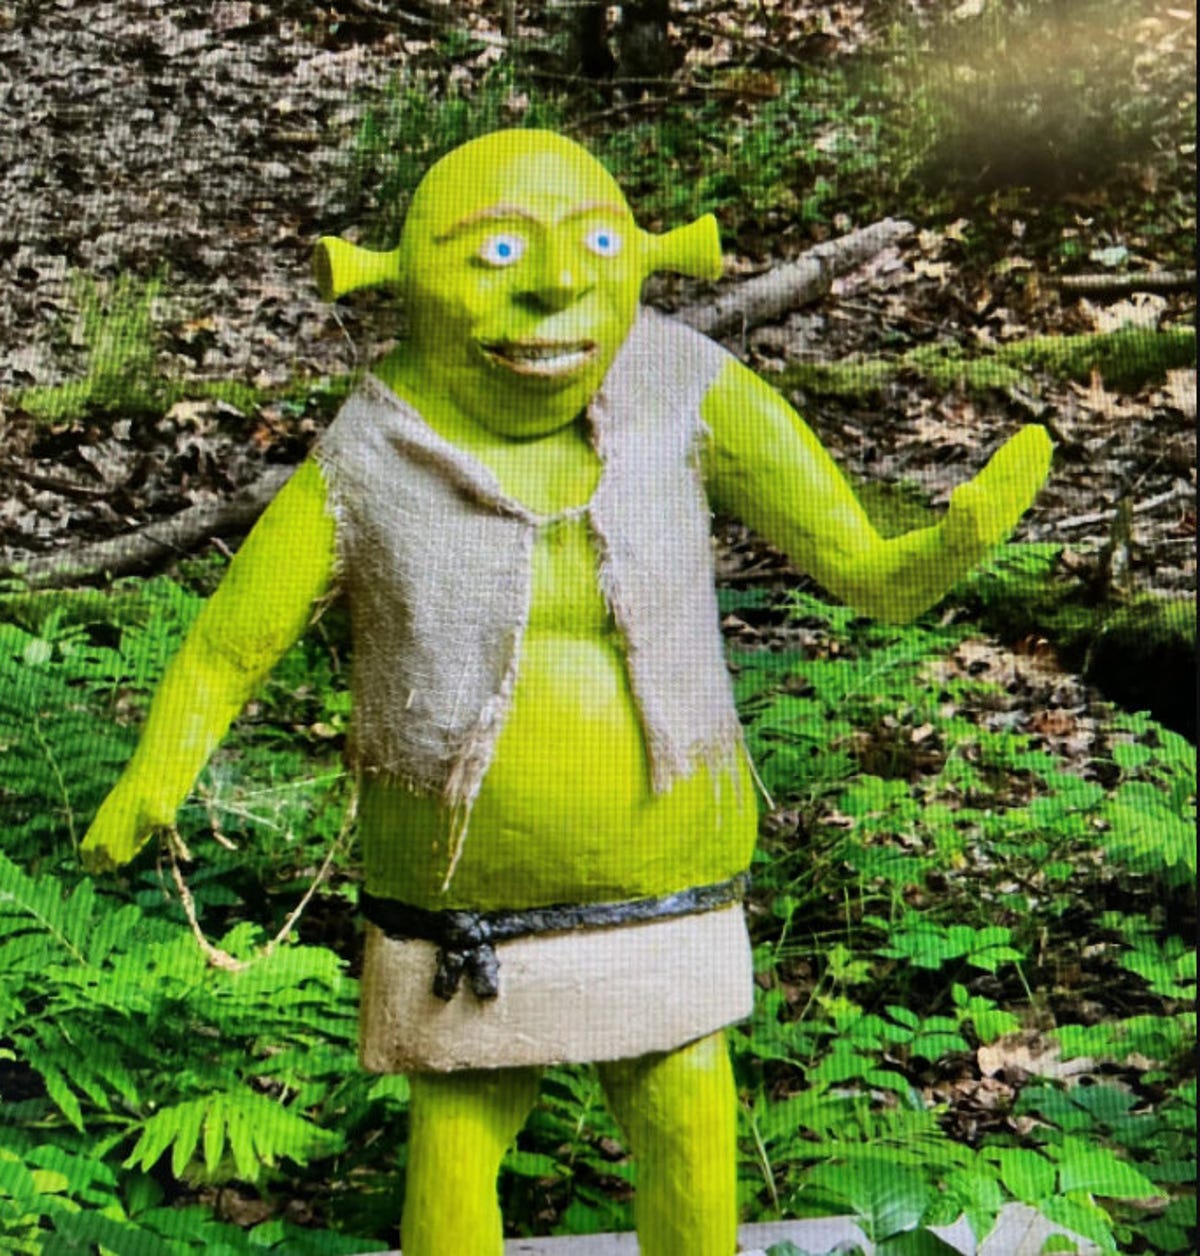 Low-res image of handmade Shrek statue showing a bright green ogre with funnel-like ears and blue eyes wearing a burlap vest with one hand extended as in a wave.